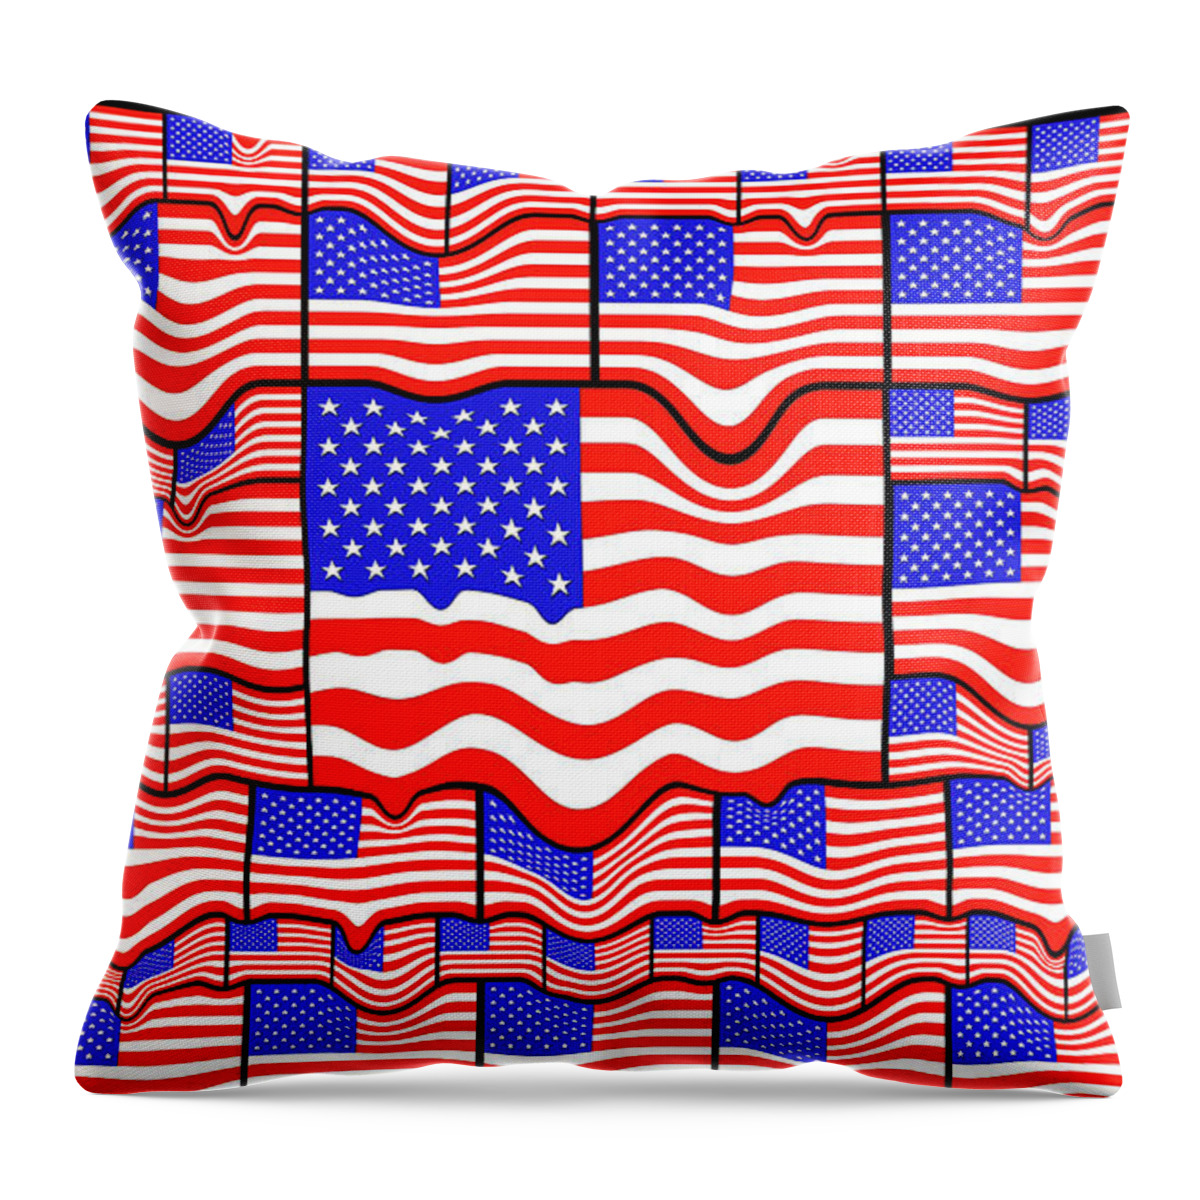 America Throw Pillow featuring the digital art Soft American Flags by Mike McGlothlen